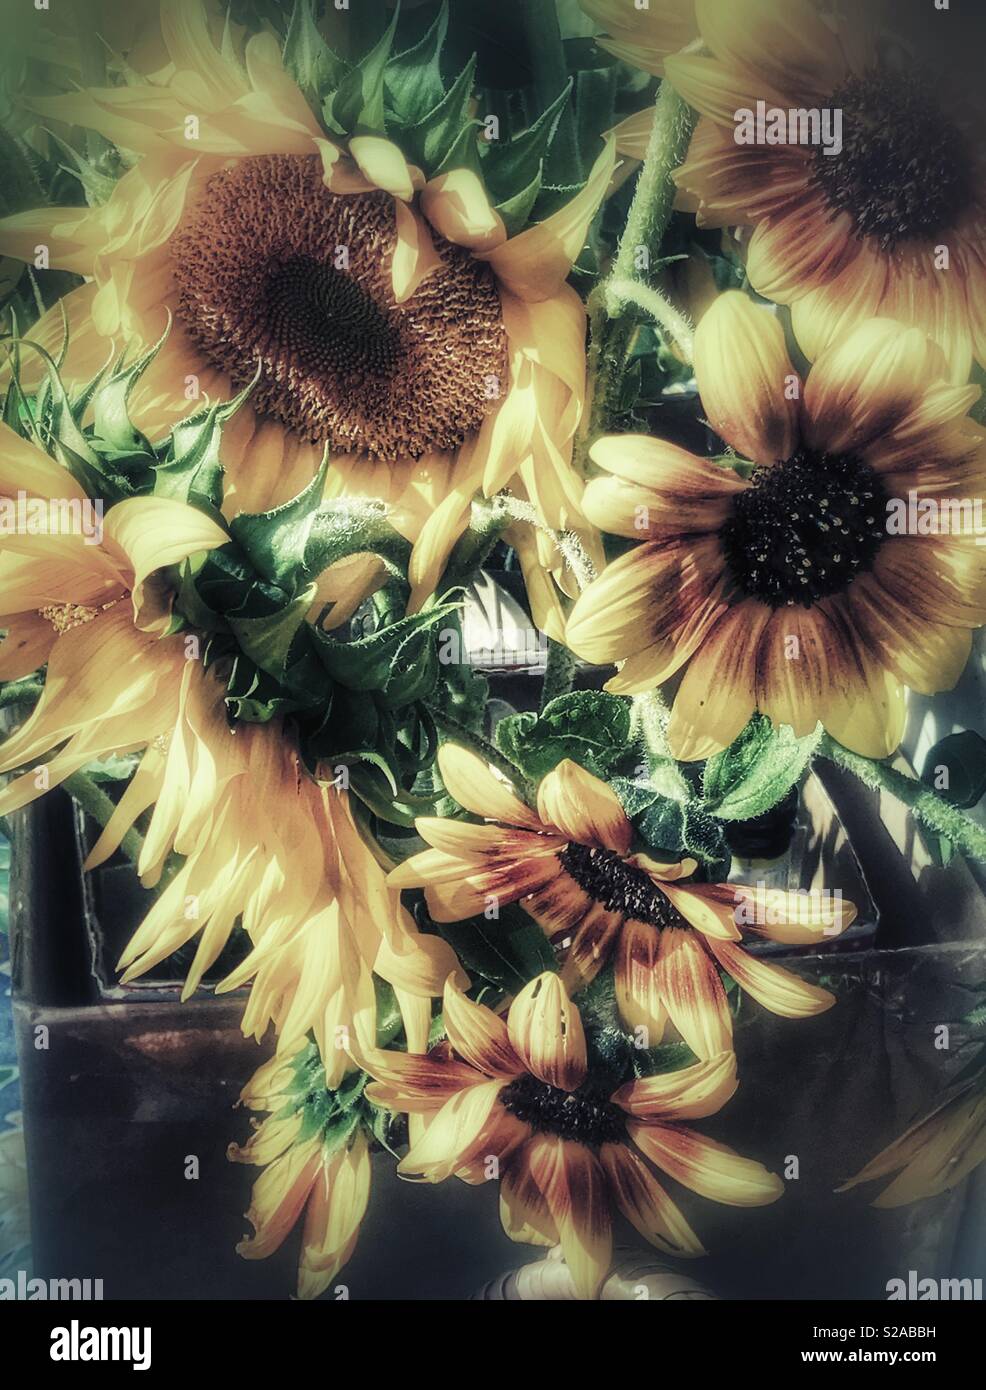 Sunflowers on display at a farmers market Stock Photo